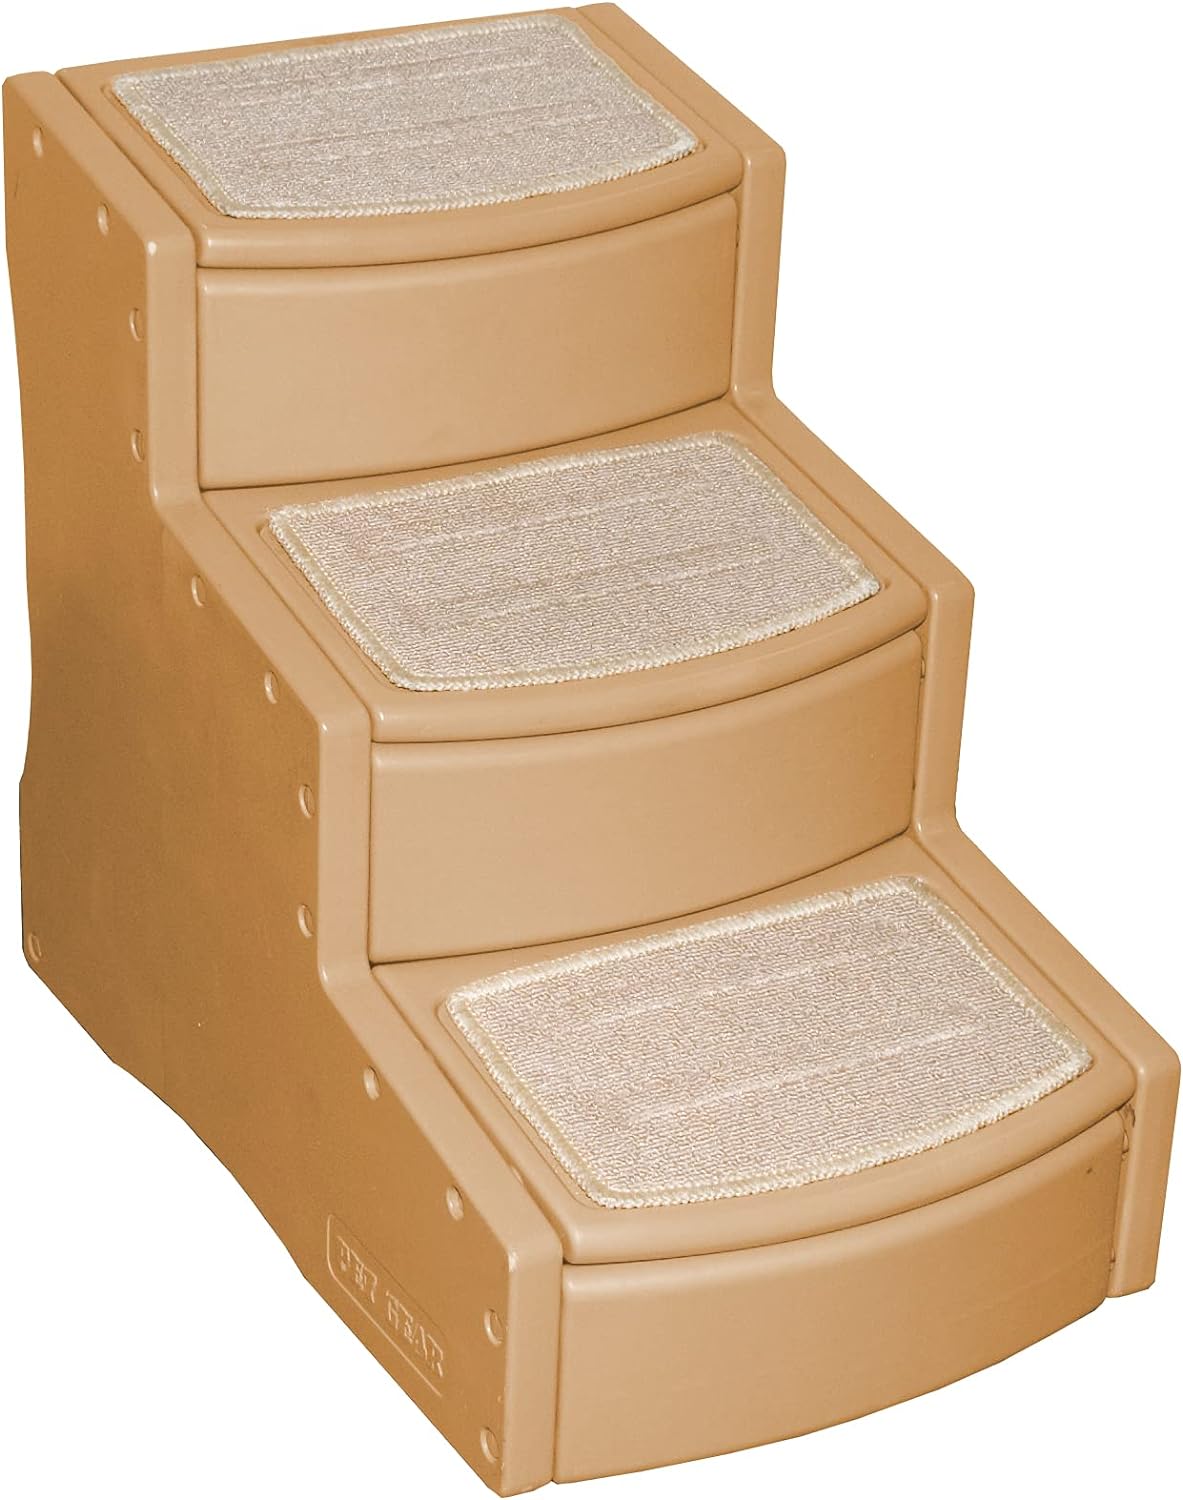 Pet Gear Easy Step III Pet Stairs, 3 Step for Cats\/Dogs, Removable Washable Carpet Treads, for Pets Up to 150lbs, No Tools Required, Available in 6 Colors